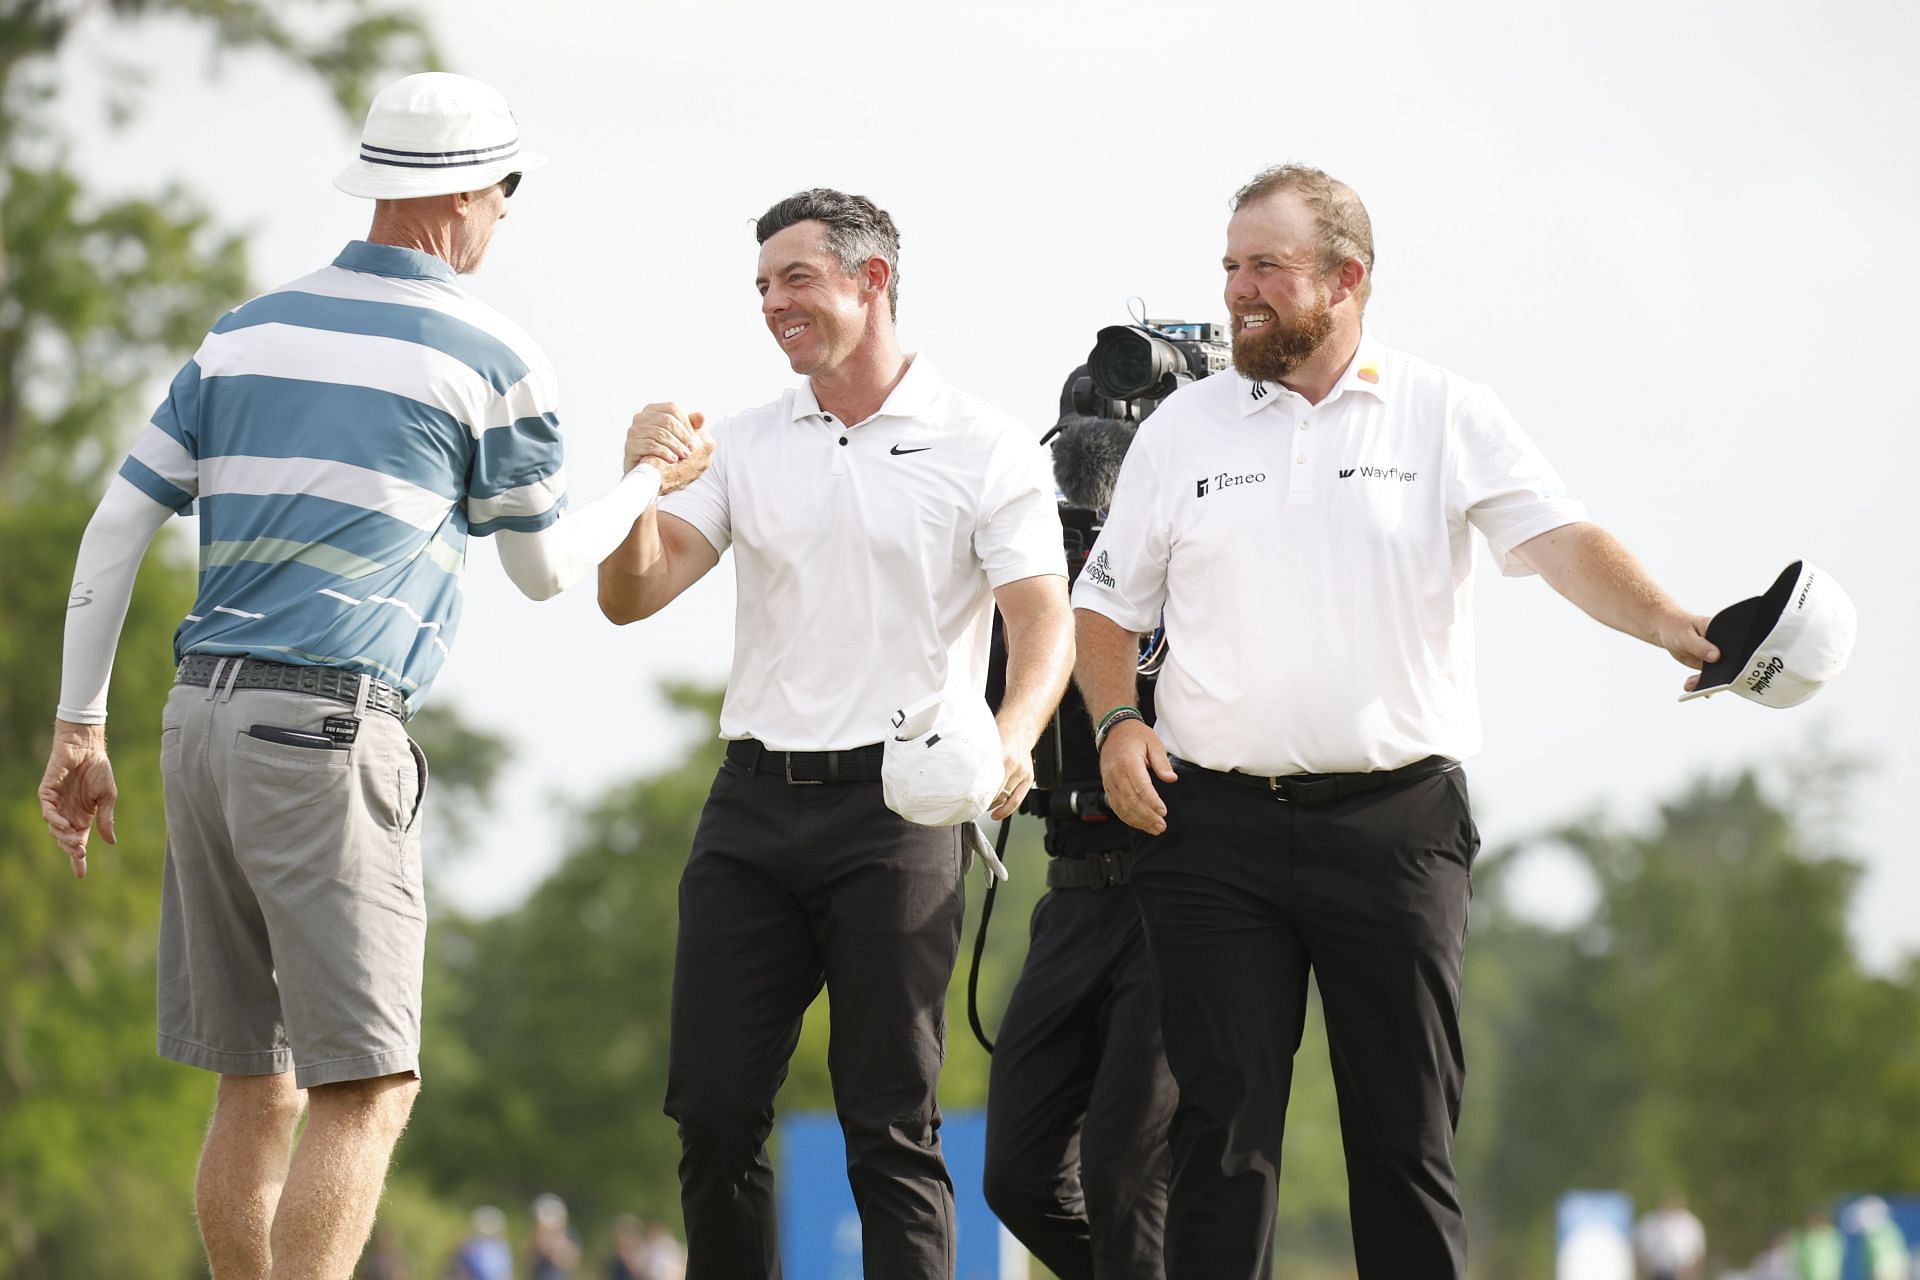 Shane Lowry deflected to Rory McIlroy at the Zurich Classic